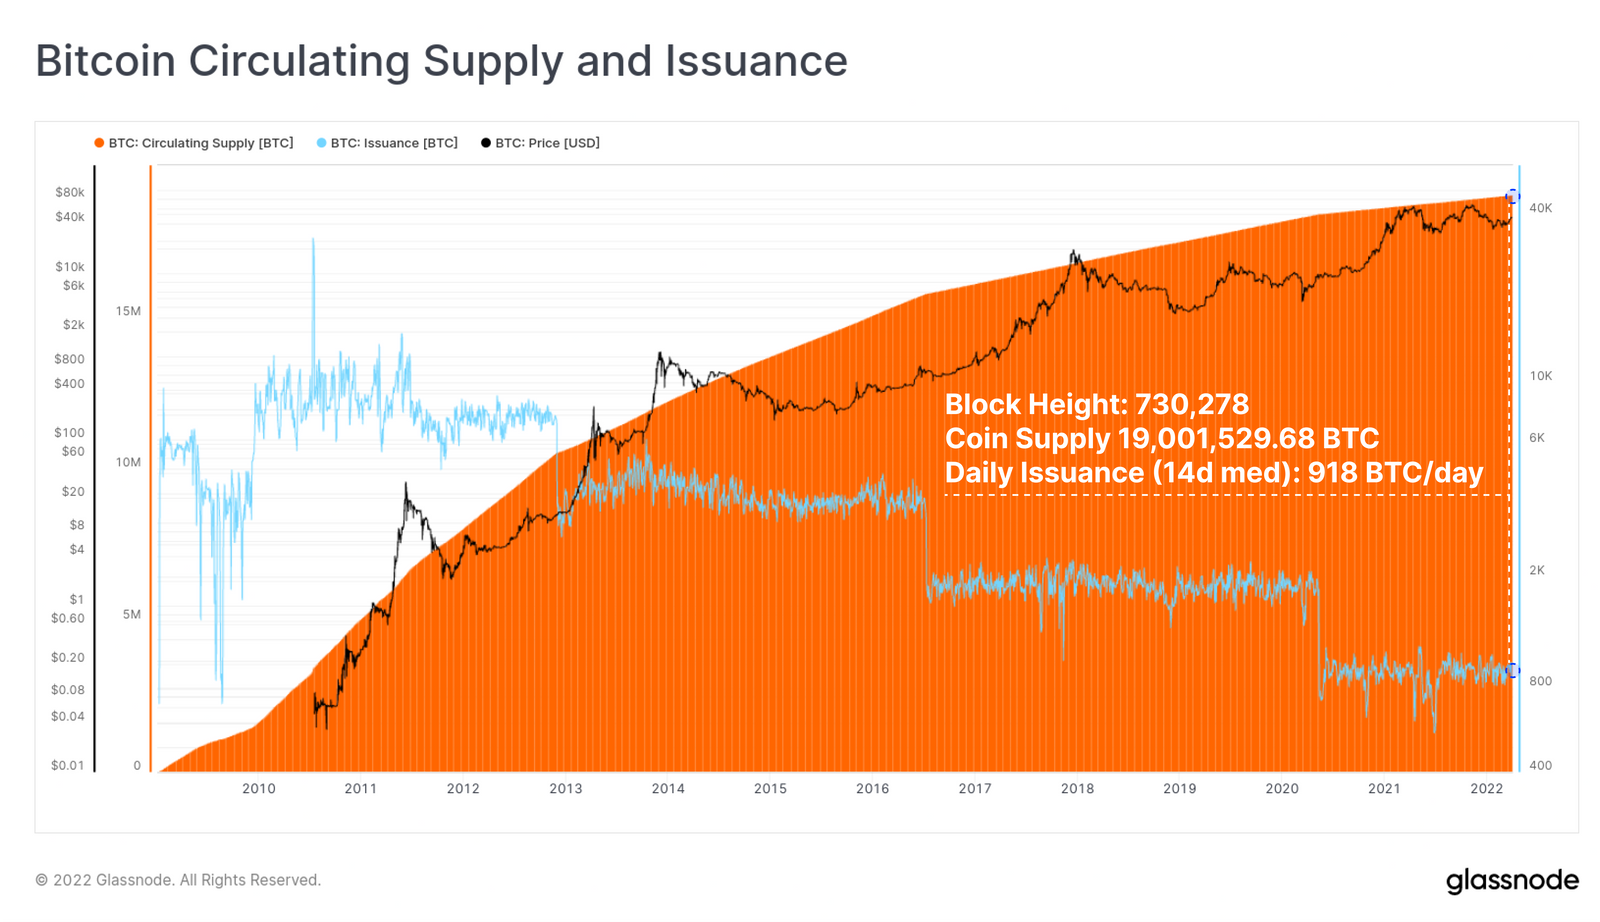 Bitcoin: Circulating Supply and Issuance